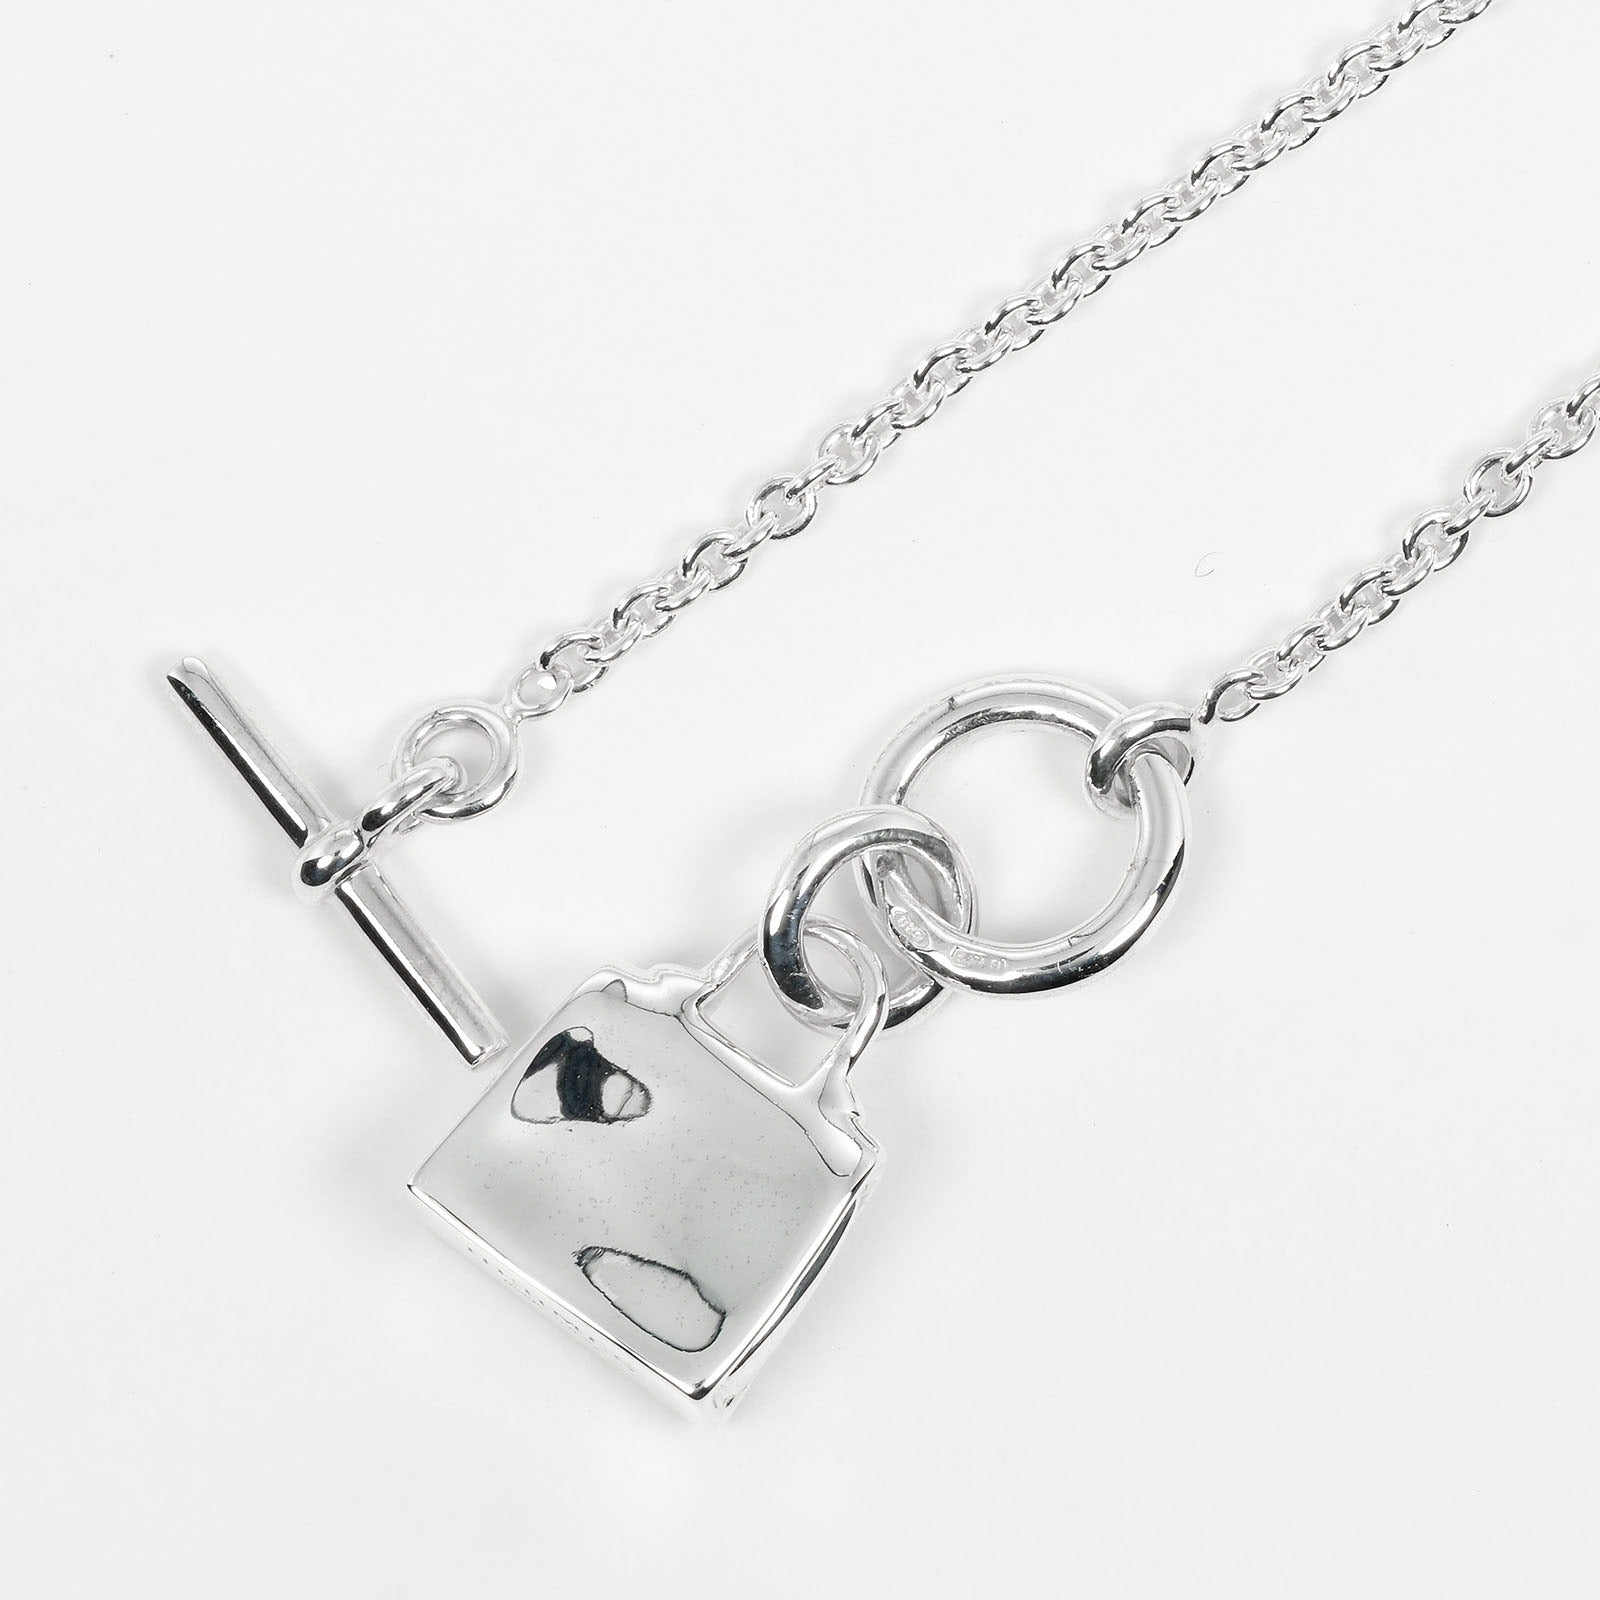 Hermes Amulet Kelly Necklace Silver 925  12.3g A-rang